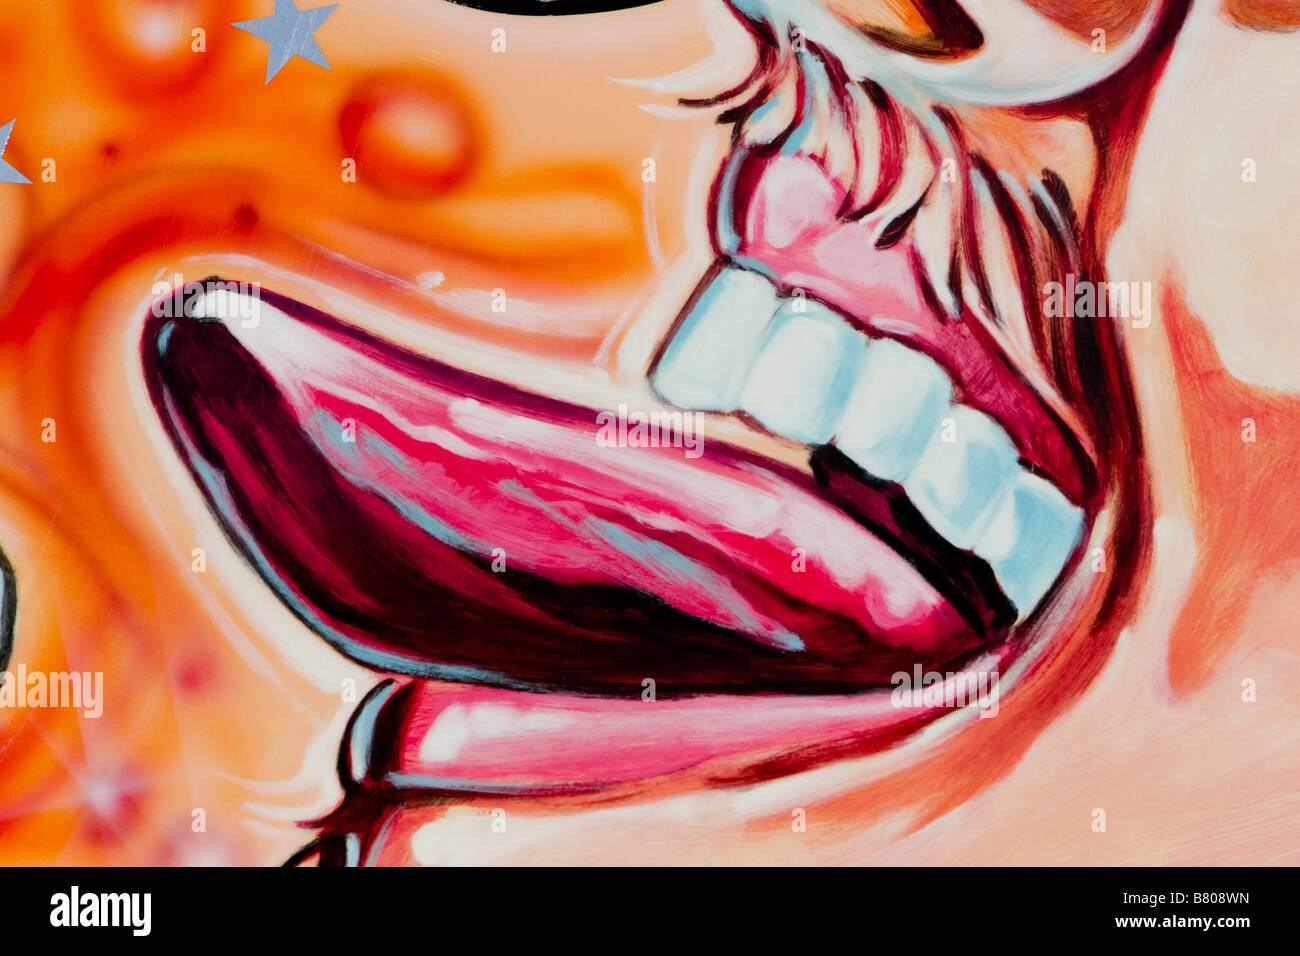 Man sticking tongue out painted wall art Stock Photo